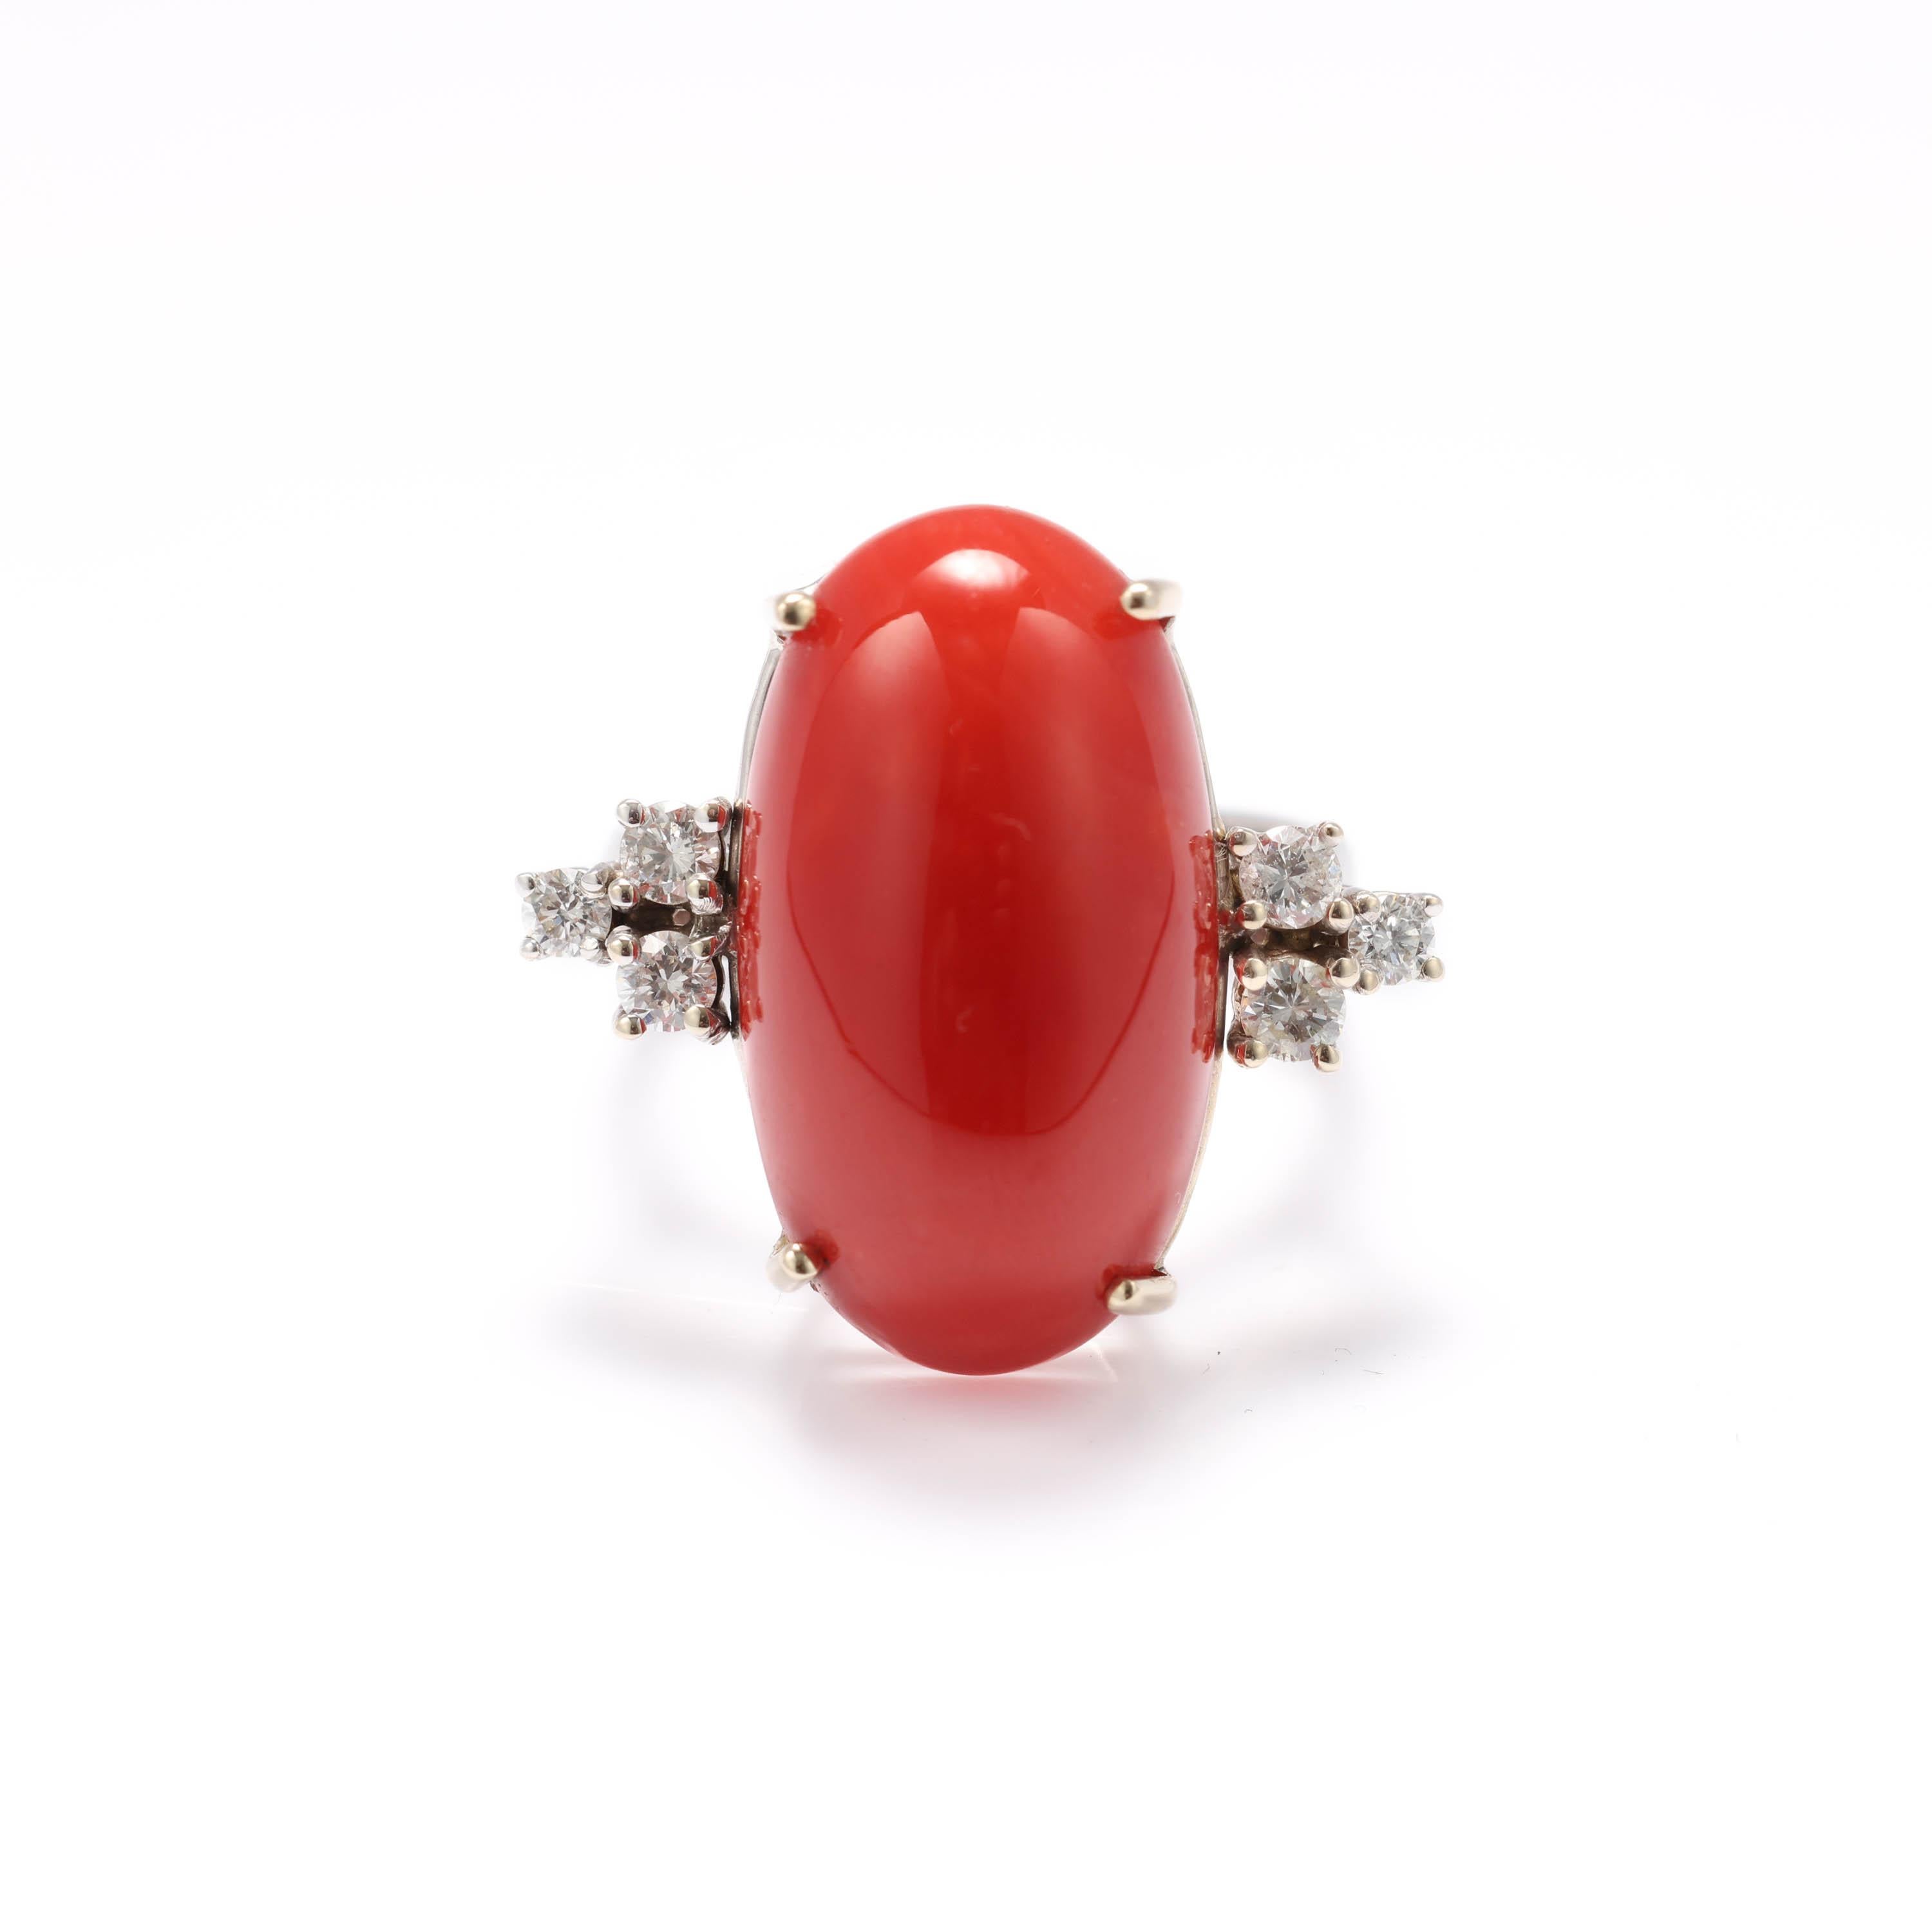 A gleaming lipstick red cabochon of natural precious coral is claw-set into a hand-fabricated 18K white gold mounting in this midcentury ring. Three eye-clean and near-colorless diamonds are set on either side like parenthesis and weigh around .35